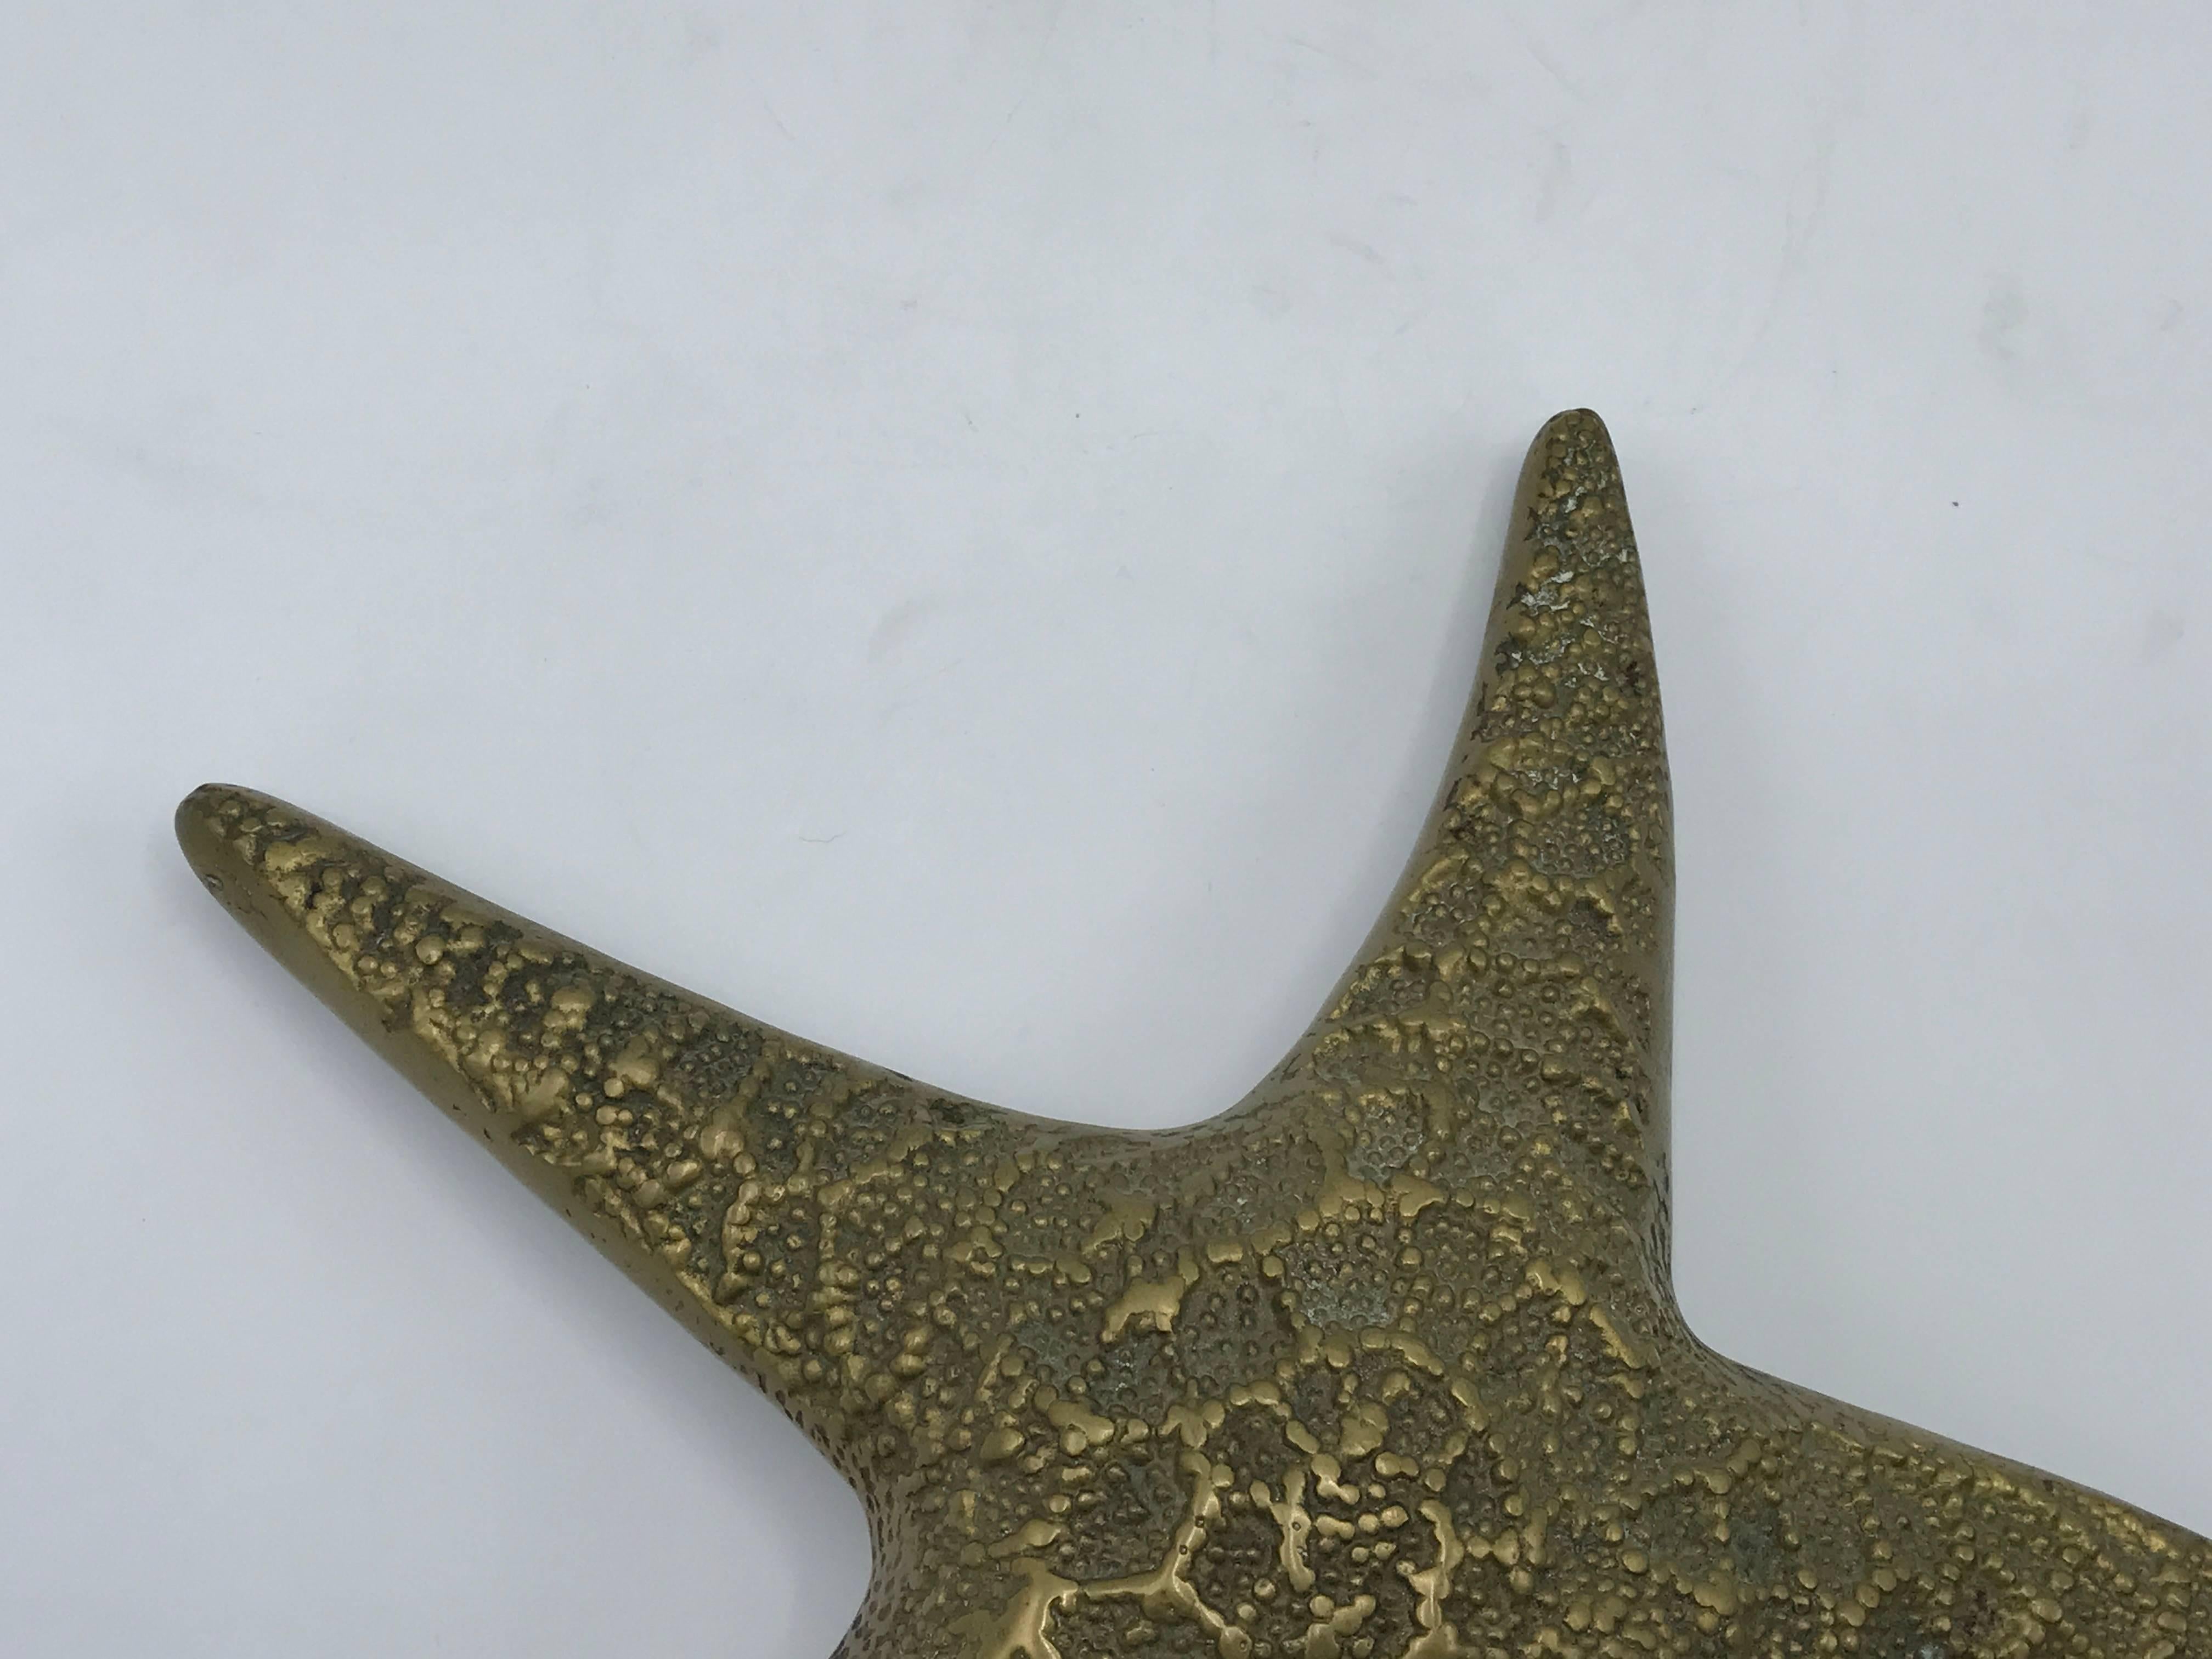 Offered is a stunning, 1960s solid-brass starfish sculpture. Hook on backside to hang.